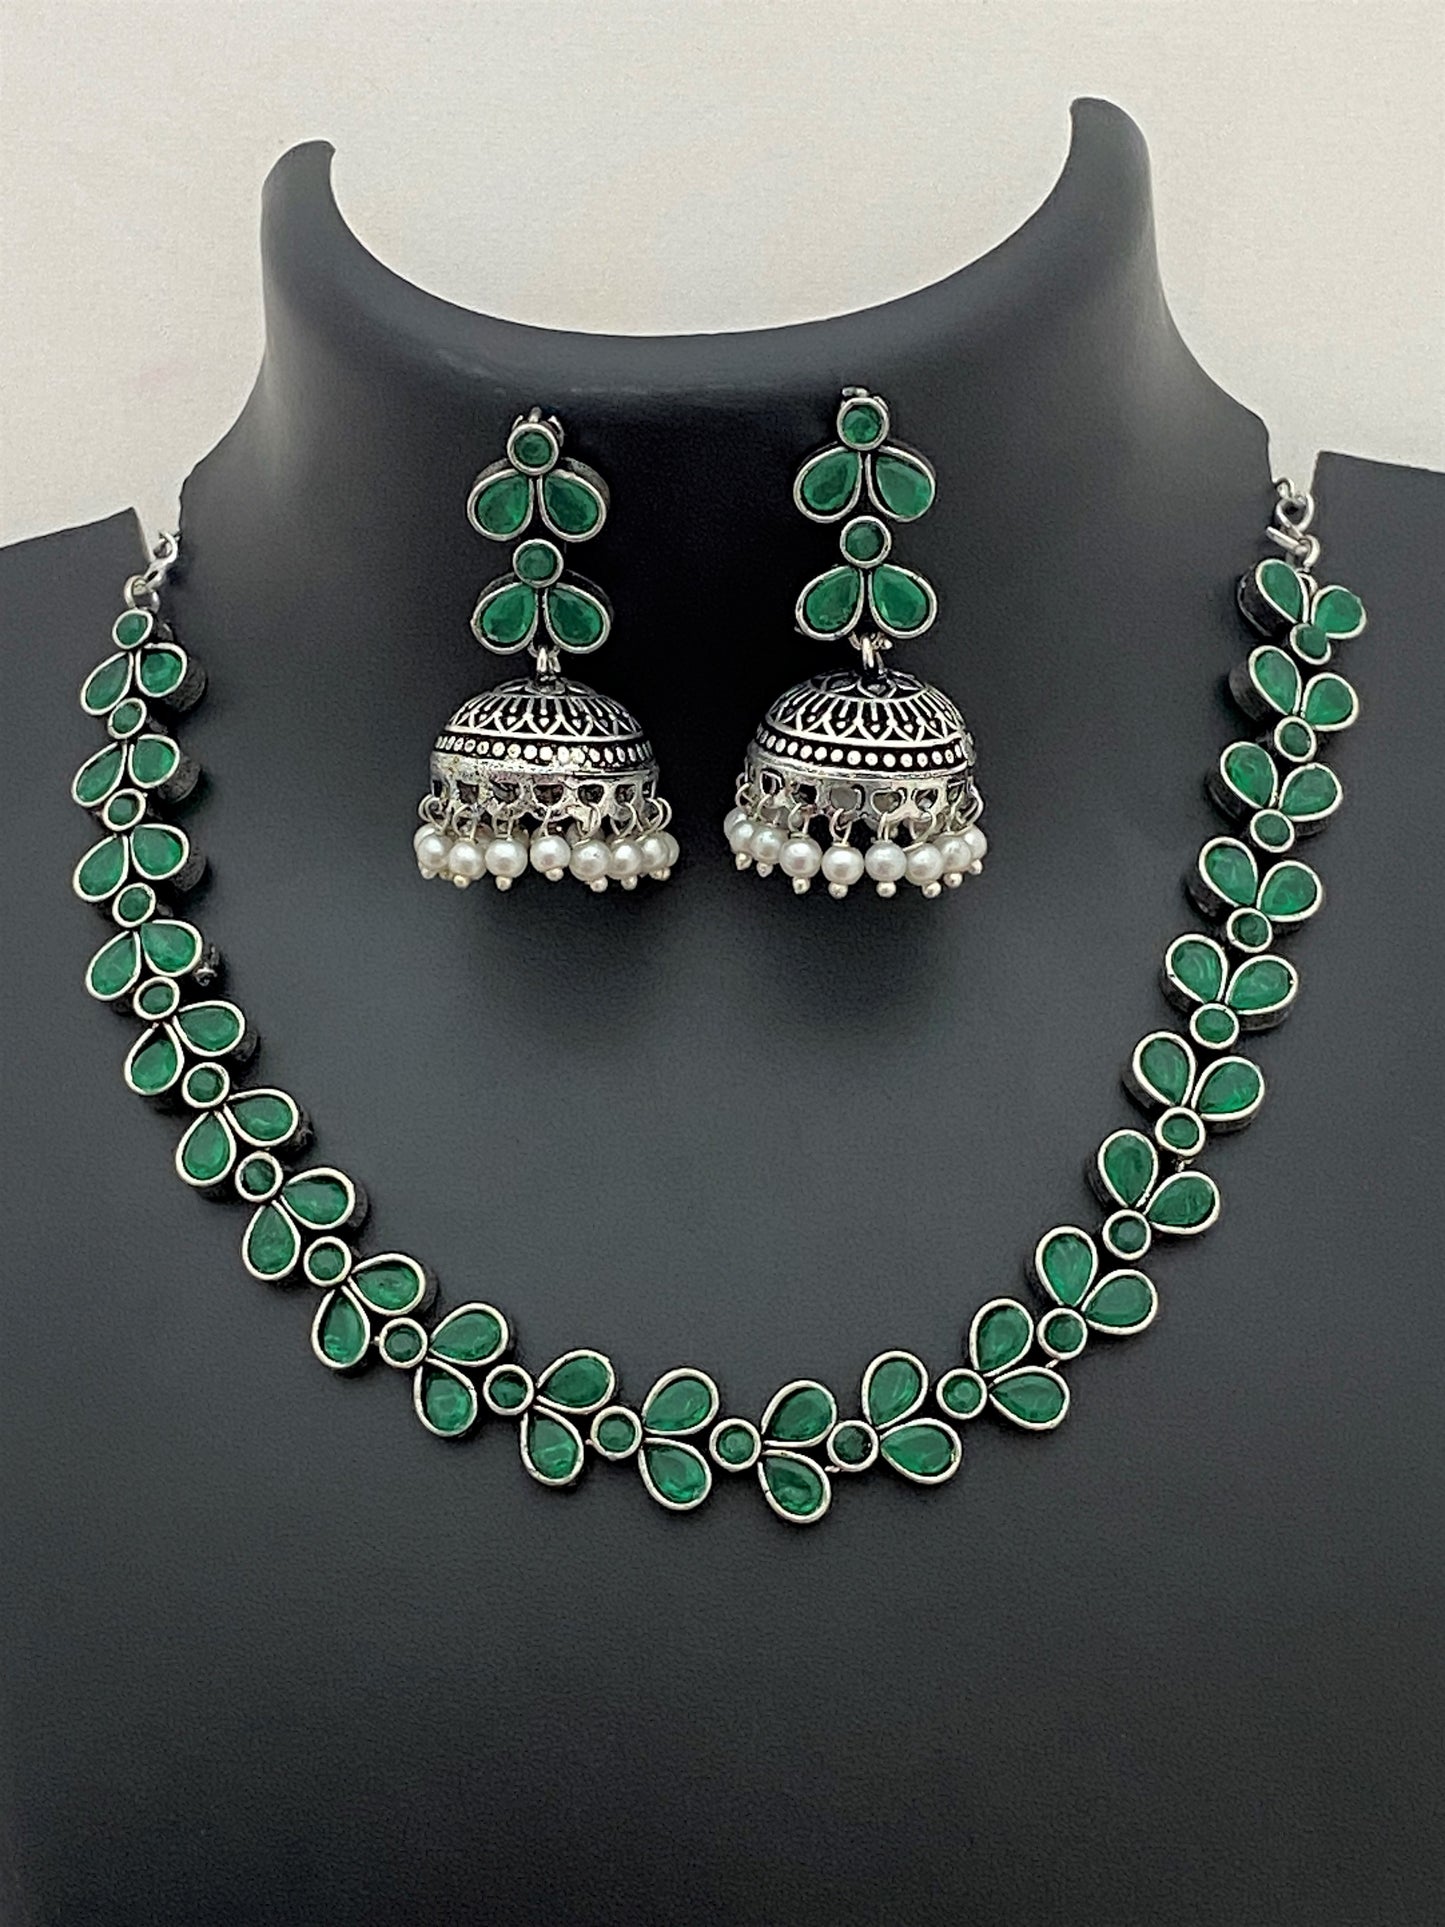 Traditional Oxidized German Silver Necklace With Earrings